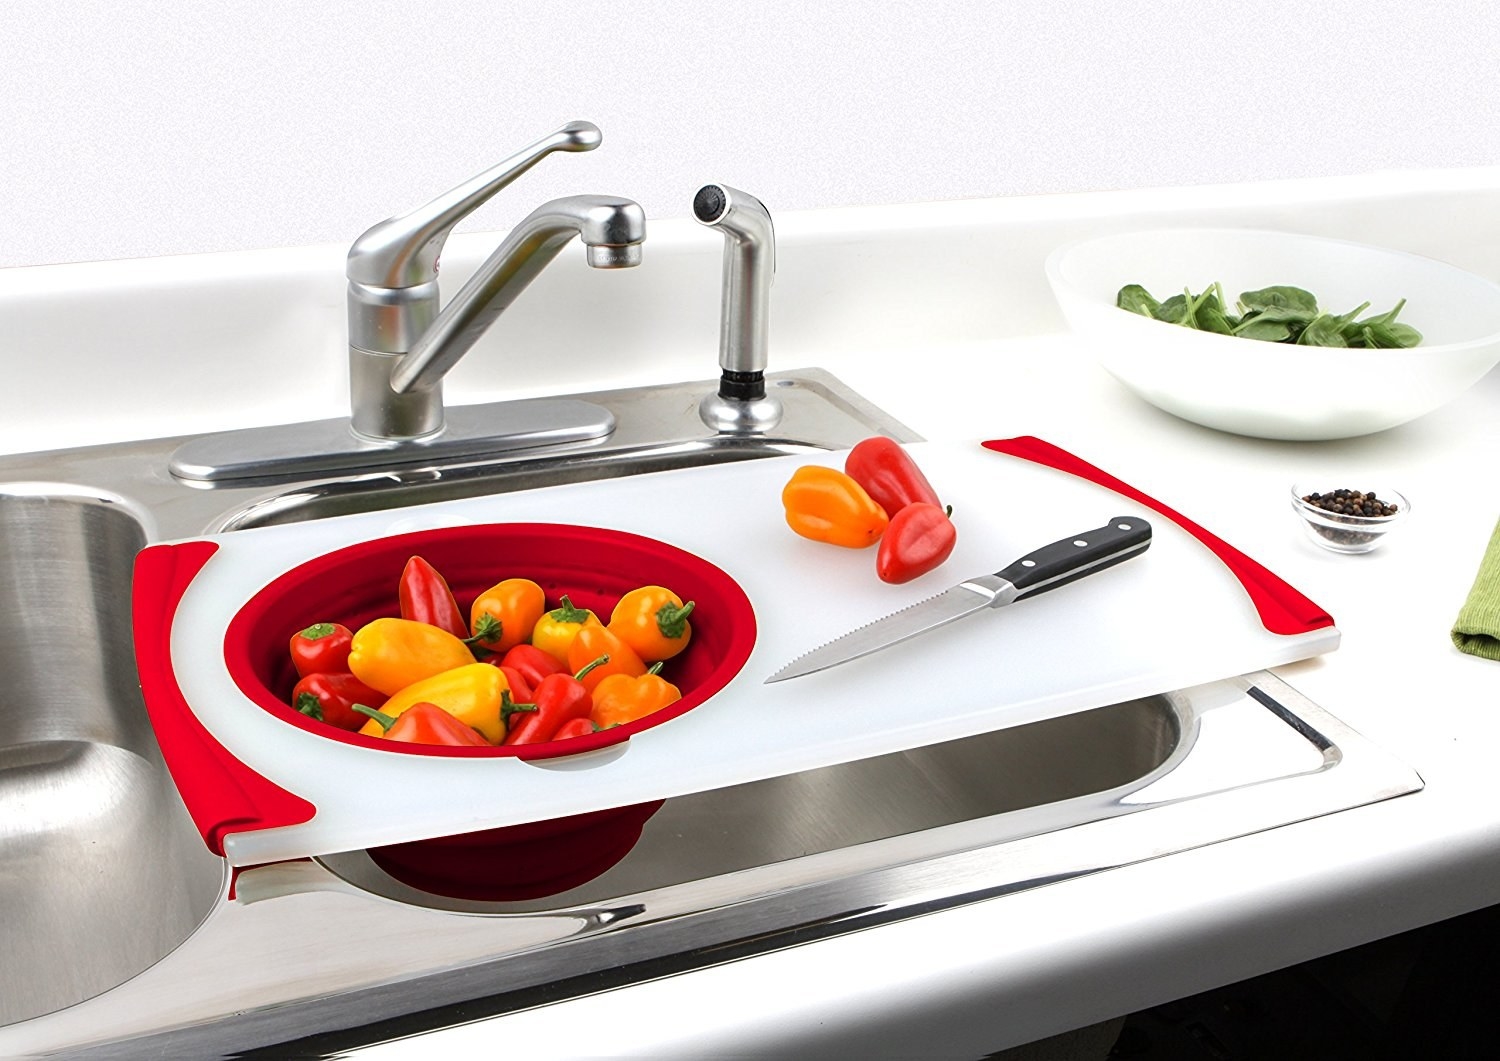 A chopping board with strainer built in placed over sink 